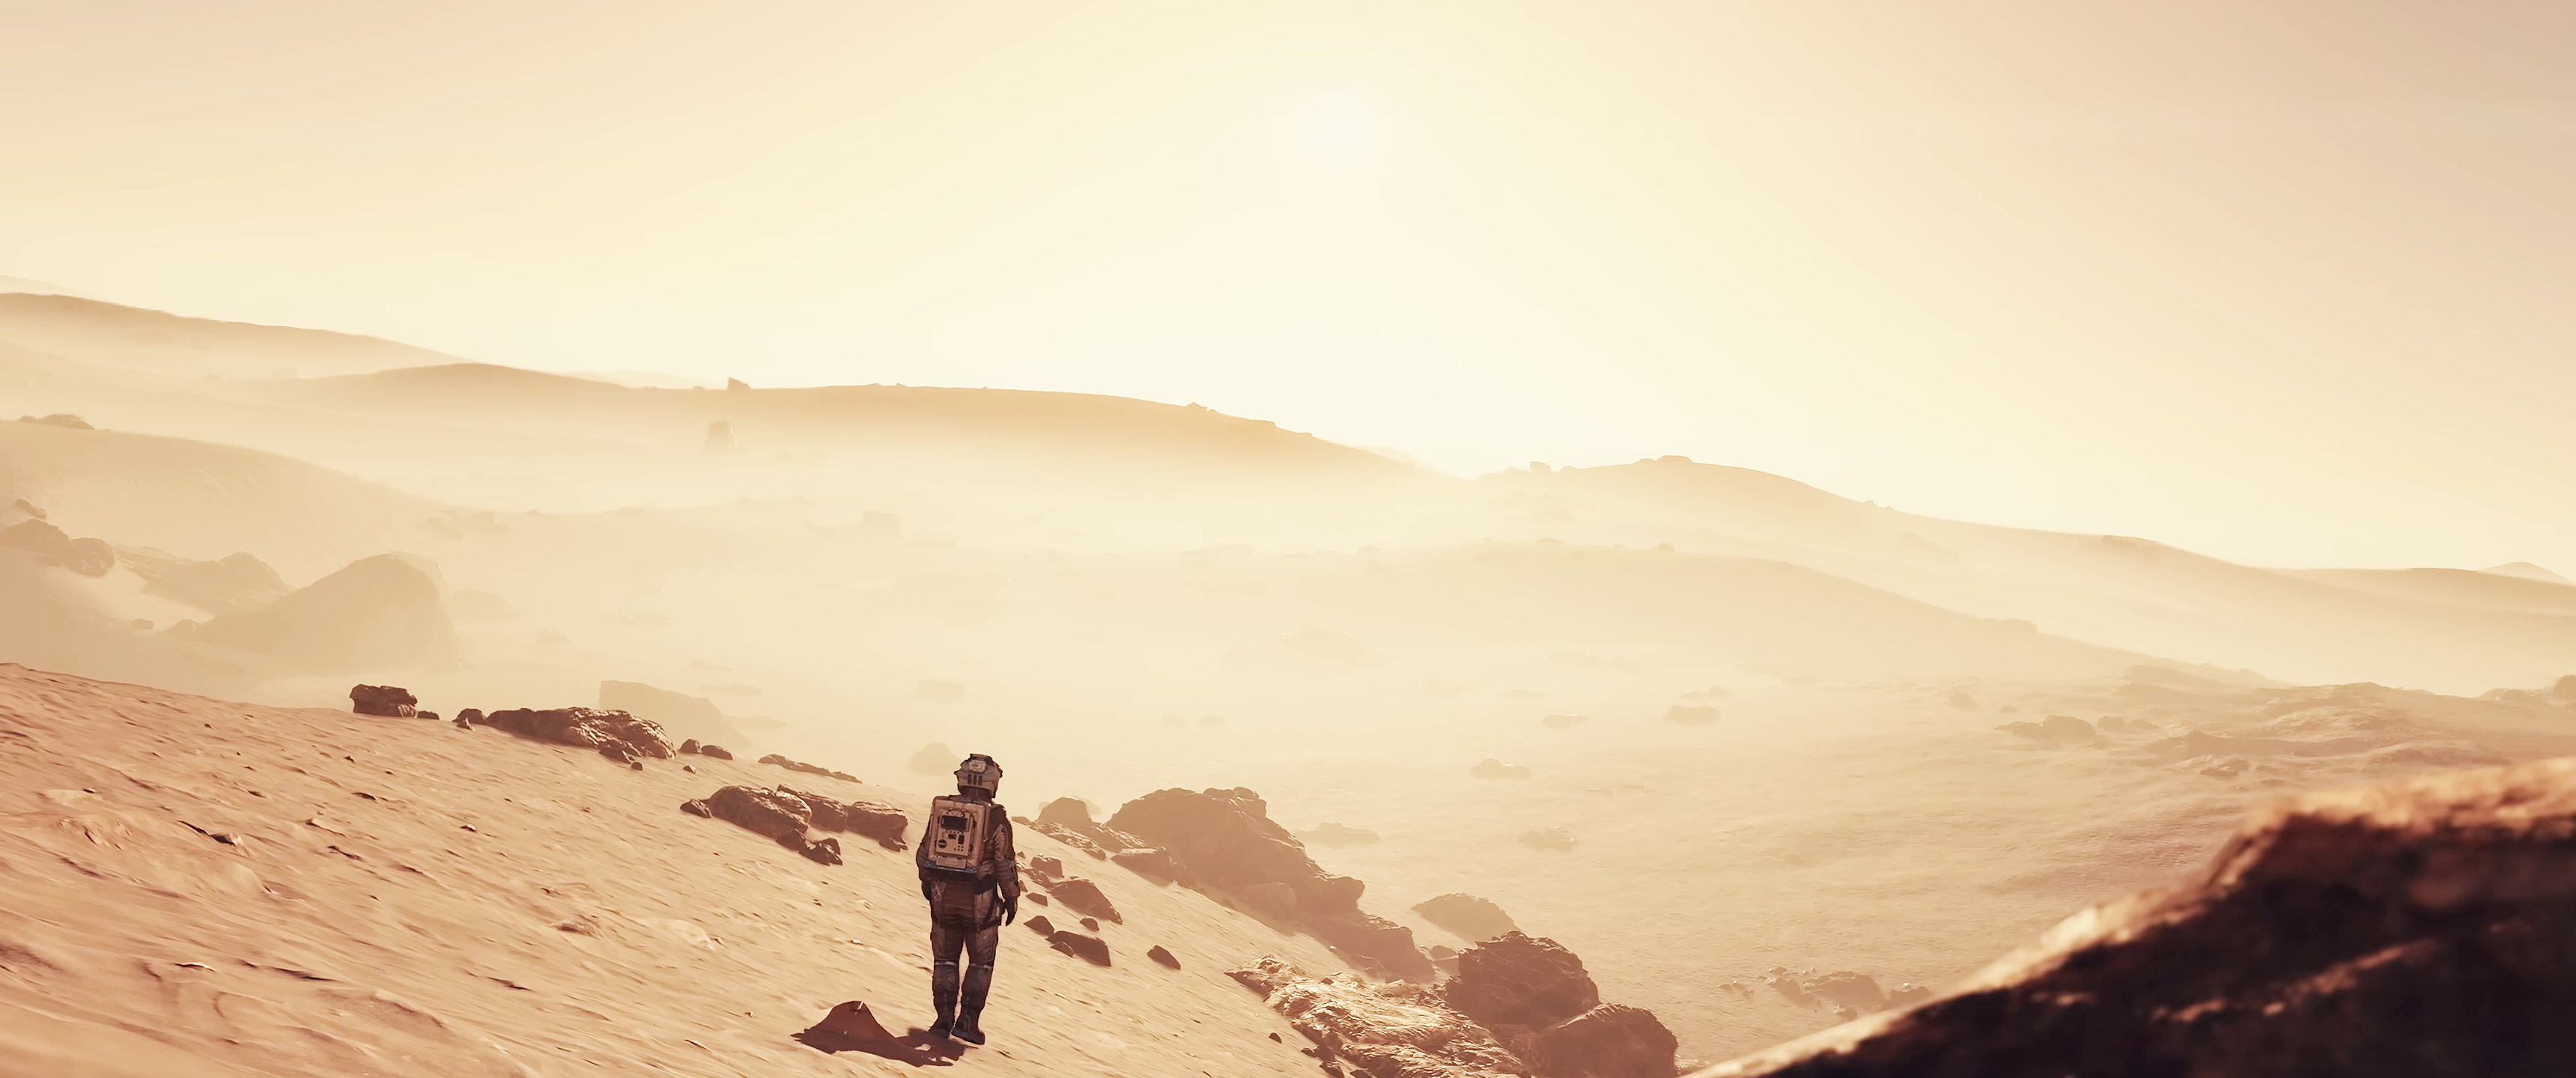 Starfield Bethesda Softworks Space Spacesuit Video Game Characters Desolate Desert Video Games Lands 3440x1440